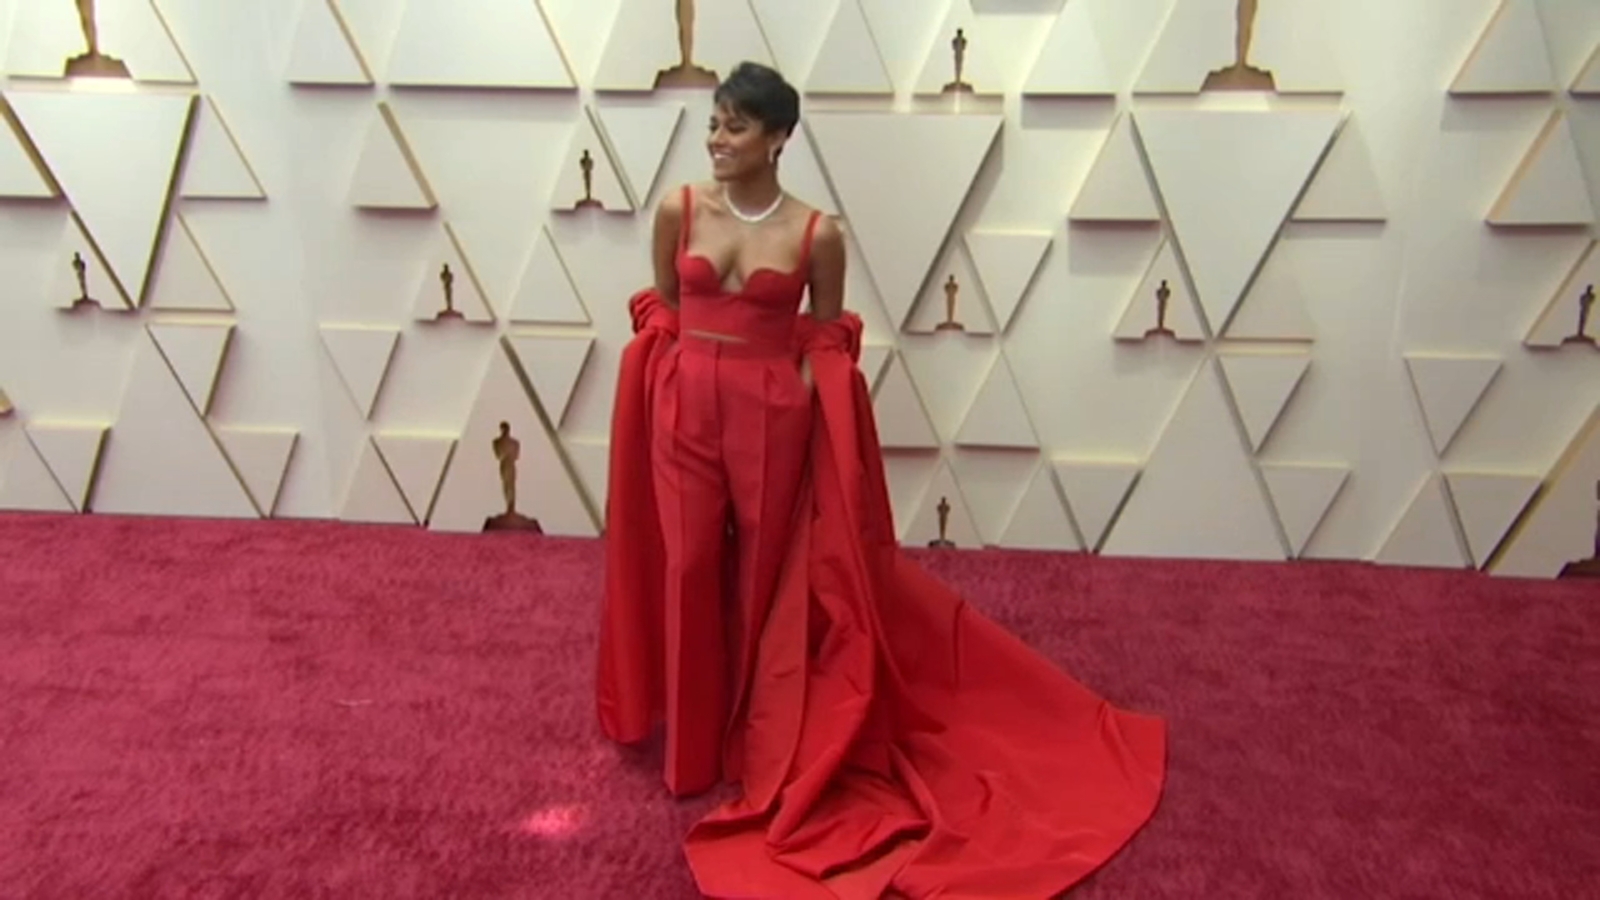 Oscars fashion and looks on red carpet just as recognized as the award winners [Video]